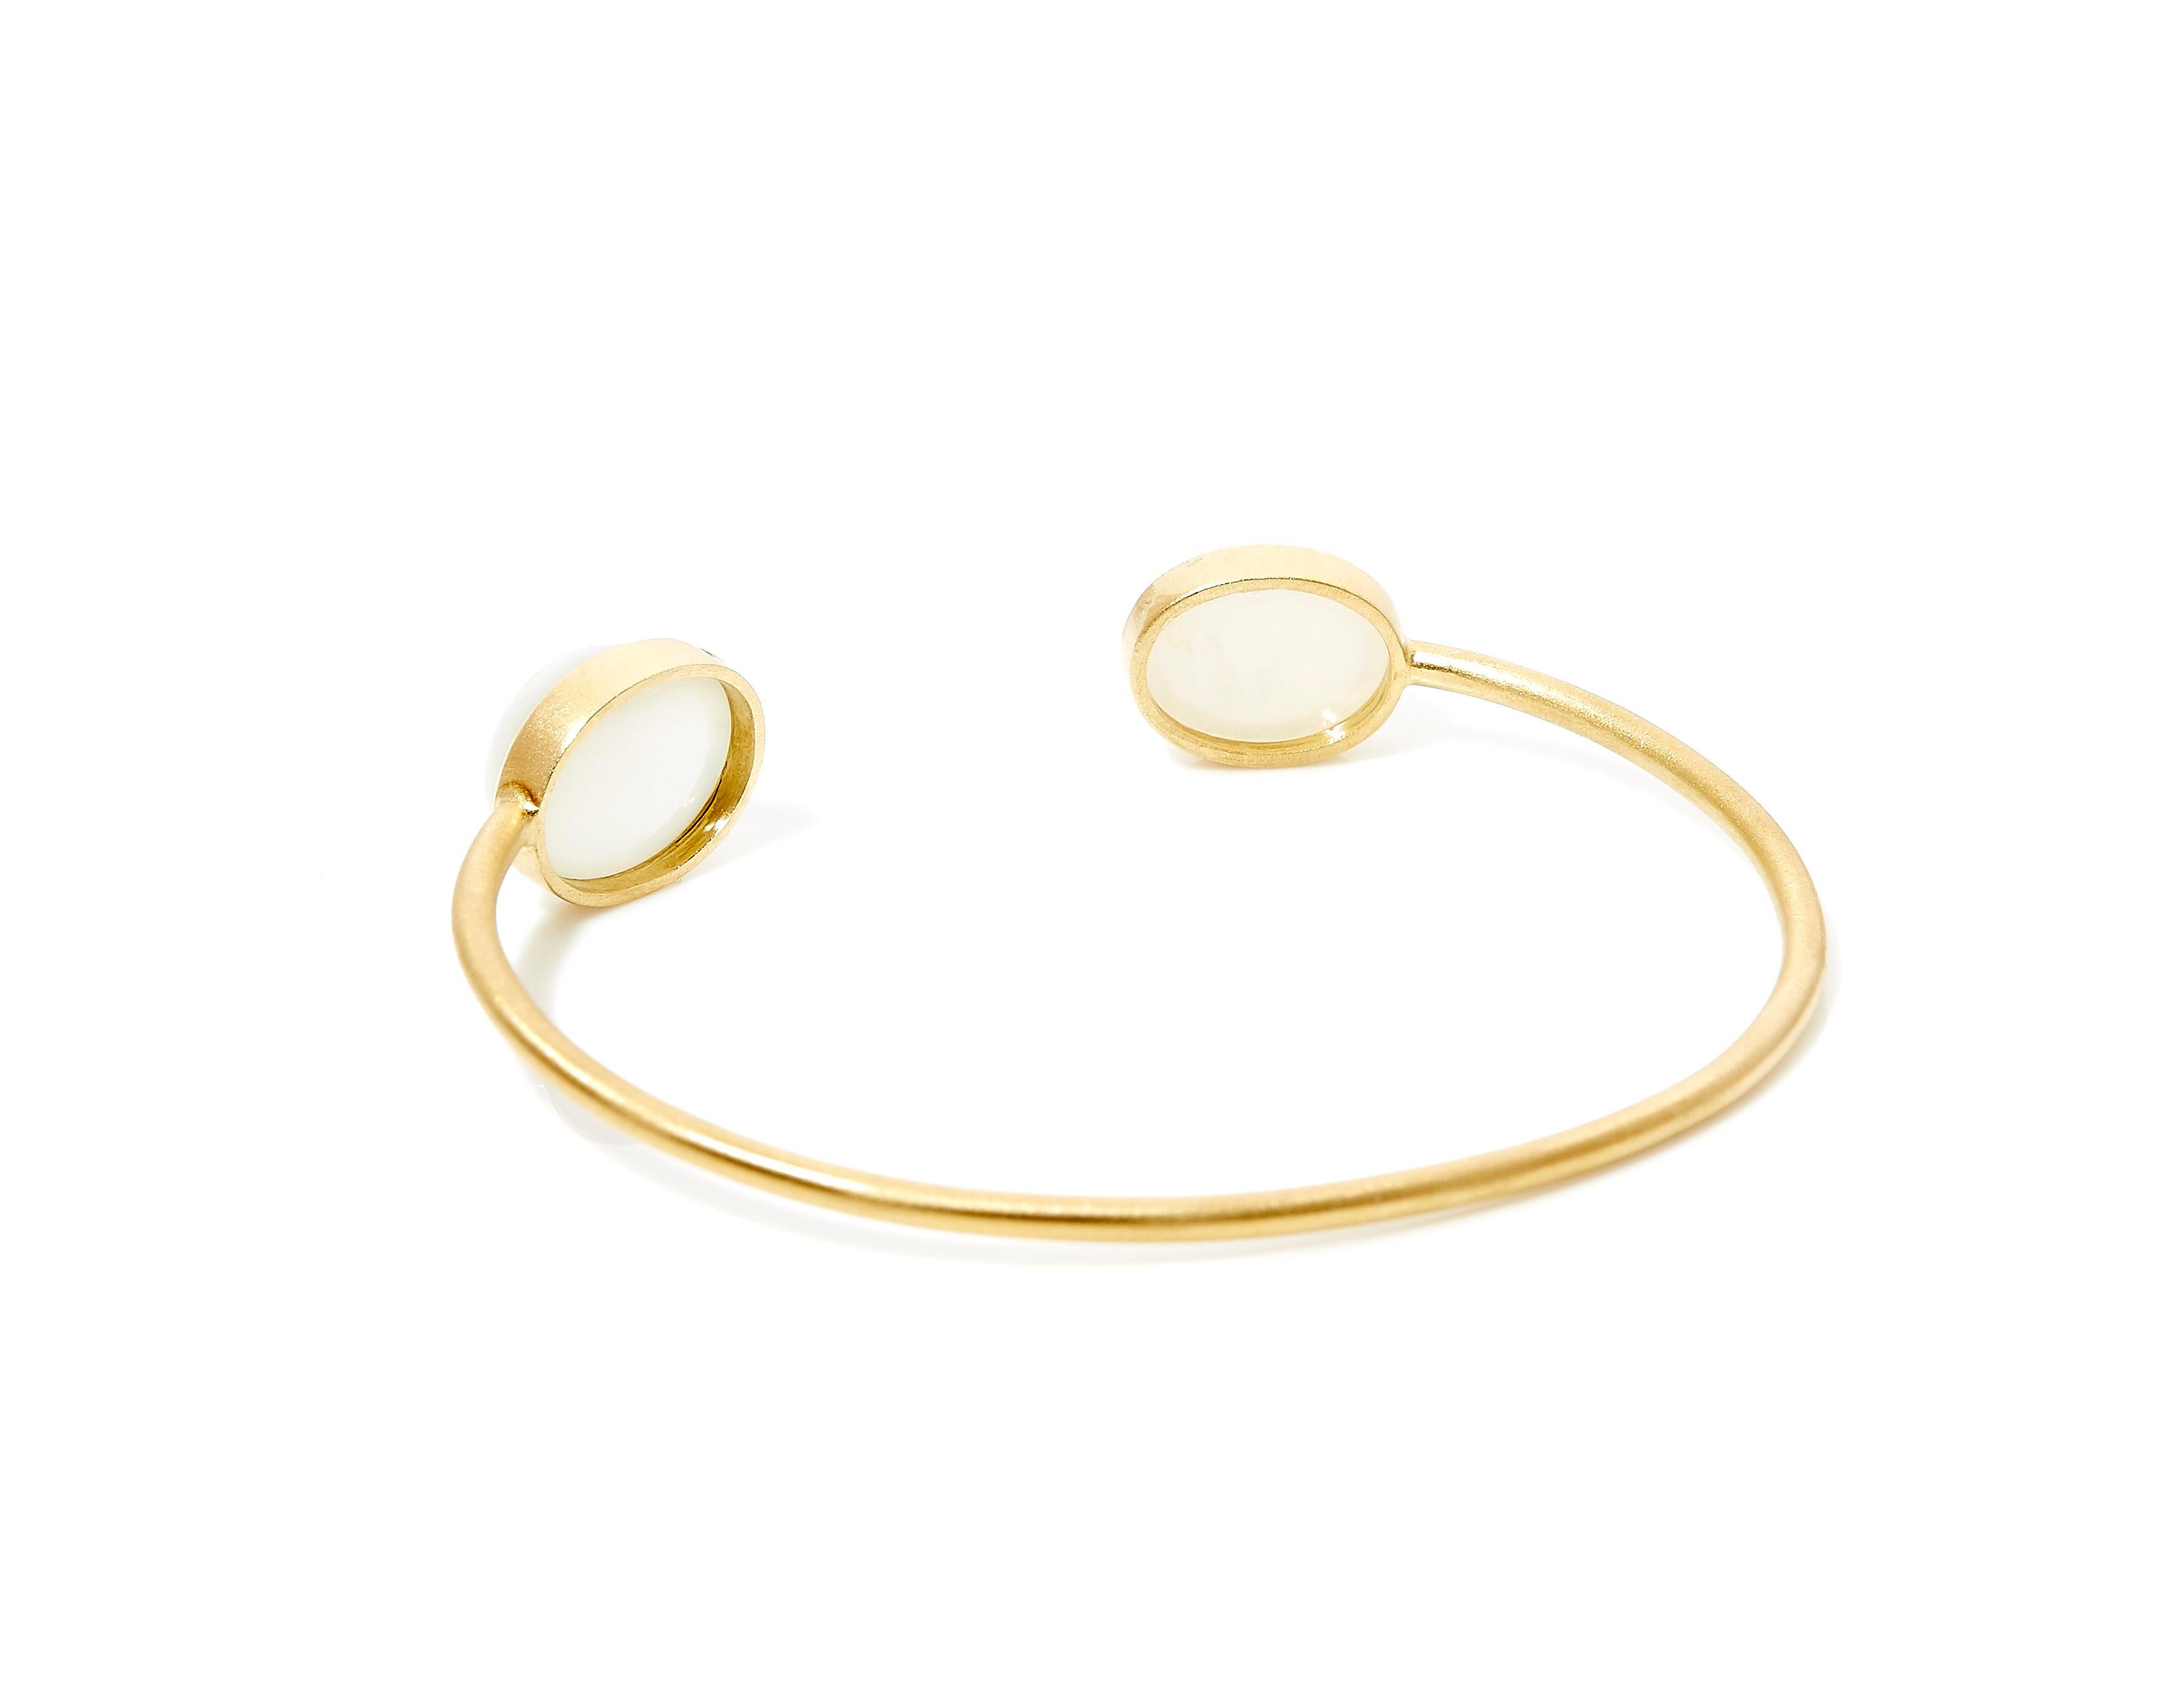 Contemporary 18 Karat Yellow Gold Cuff Bangle Bracelet with 10.41 Carat Cabochon Moonstones  For Sale